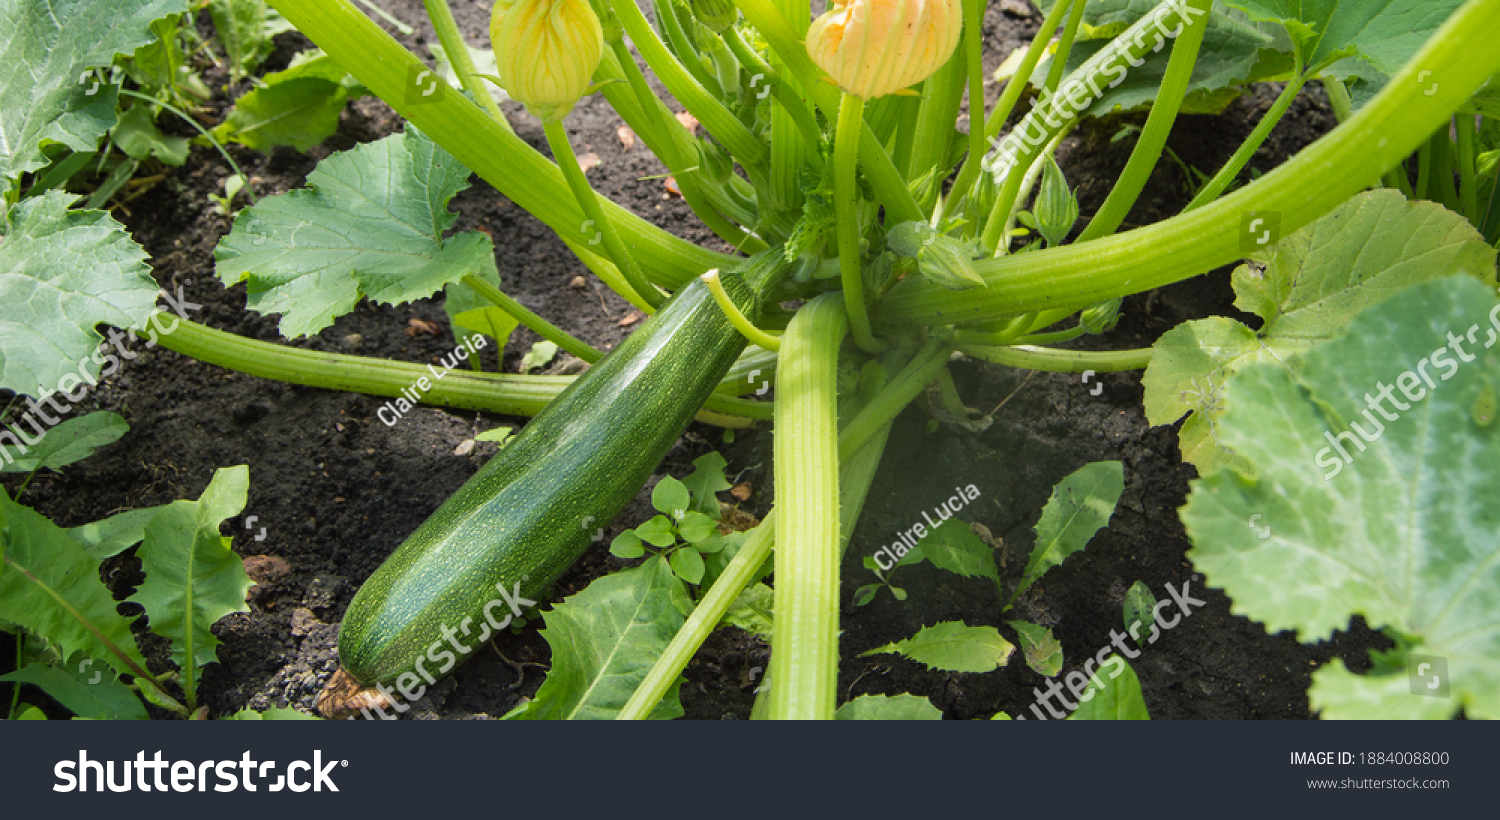 Zucchini plant with green fruits and blooming buds growing in the garden soil bed outdoors on a sunny summer day. #1884008800